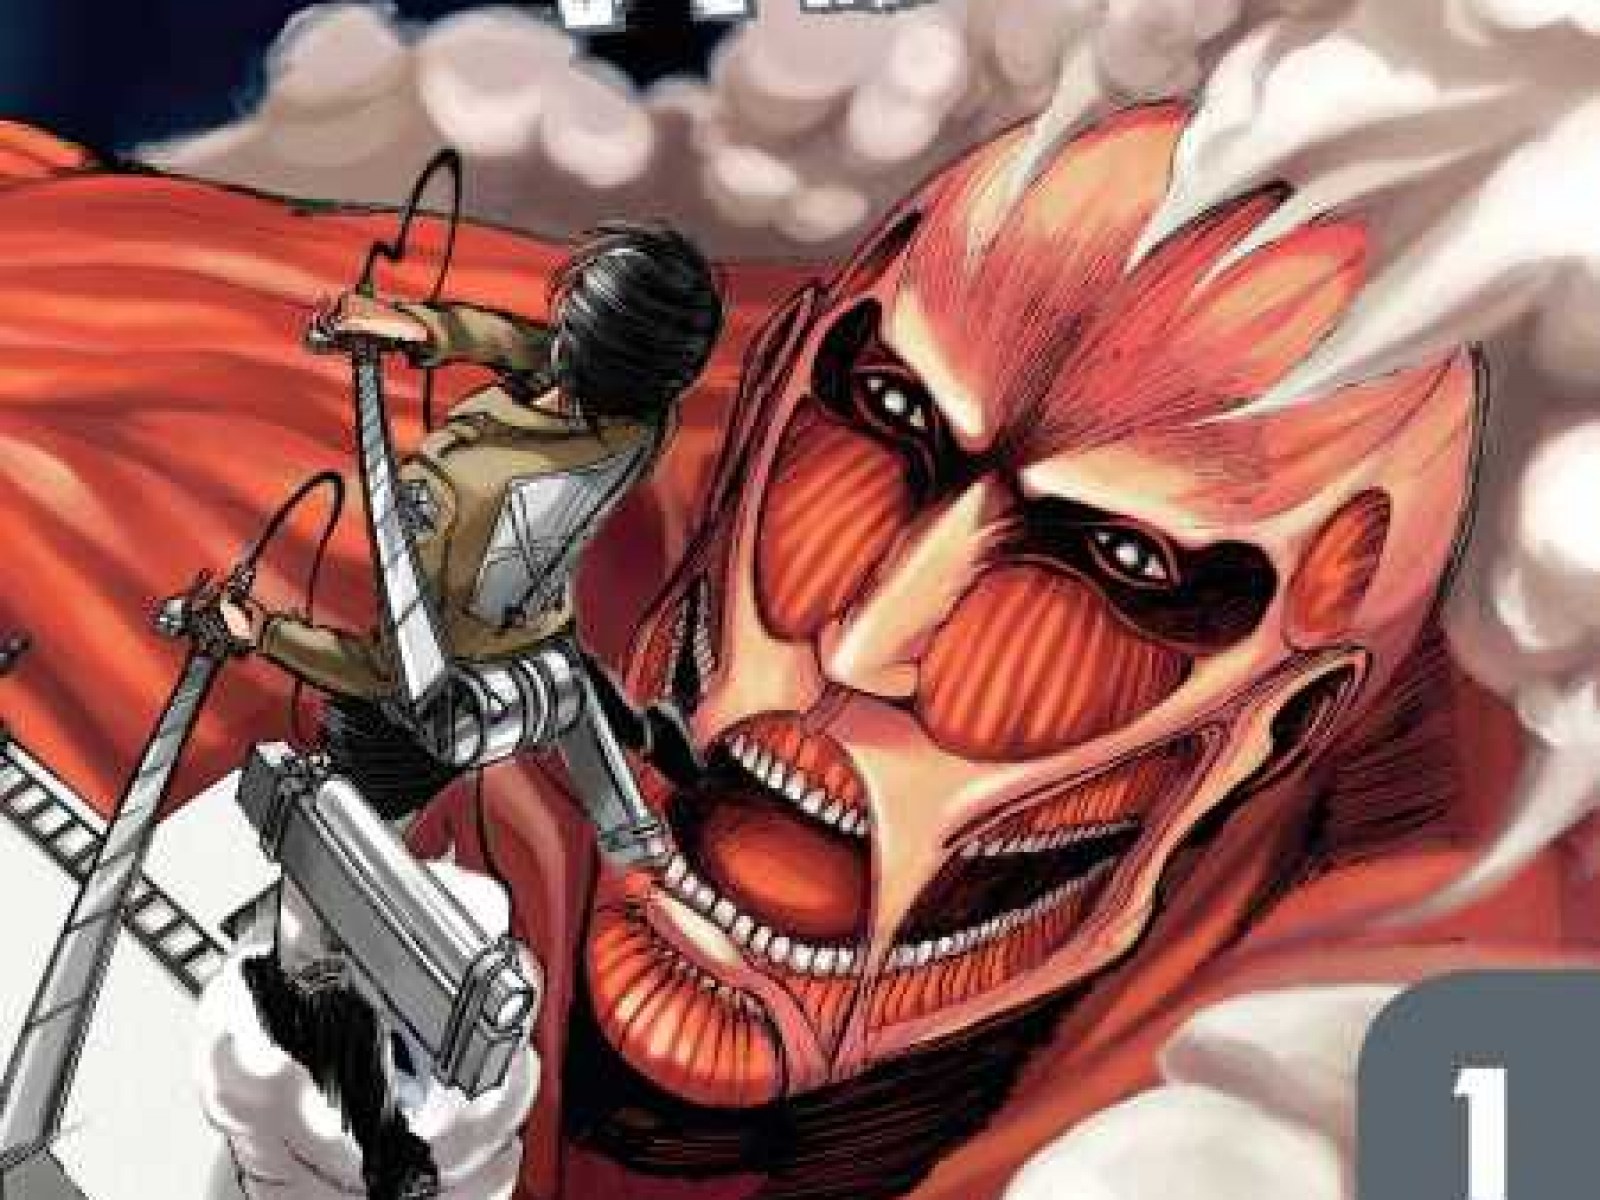 Attack on Titan' Manga Final Chapter: When and How to Read Online